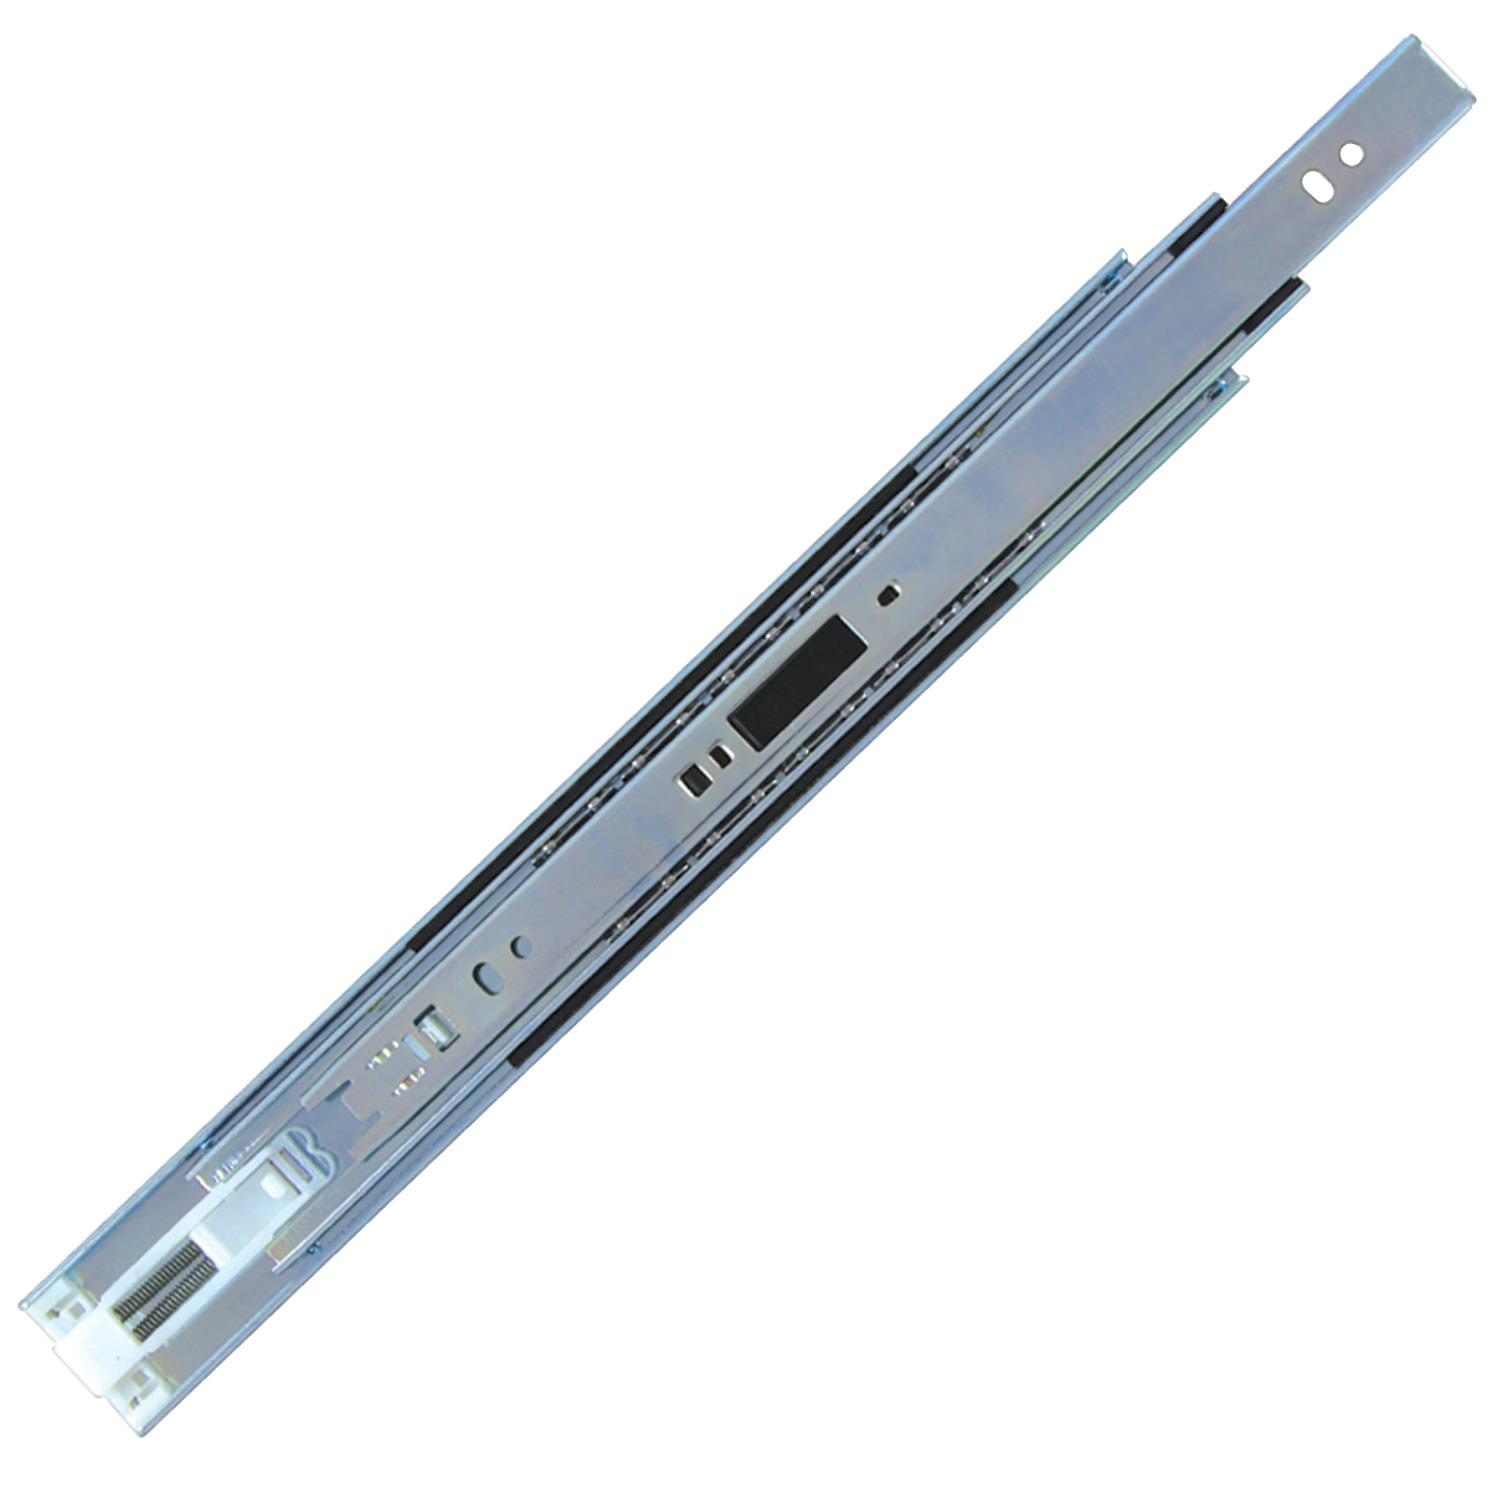 P4050.AC0600 Drawer Slide Full Extn Length 600; Load 30kg per pair. Sold Individually. Lever Disconnect; Soft Close